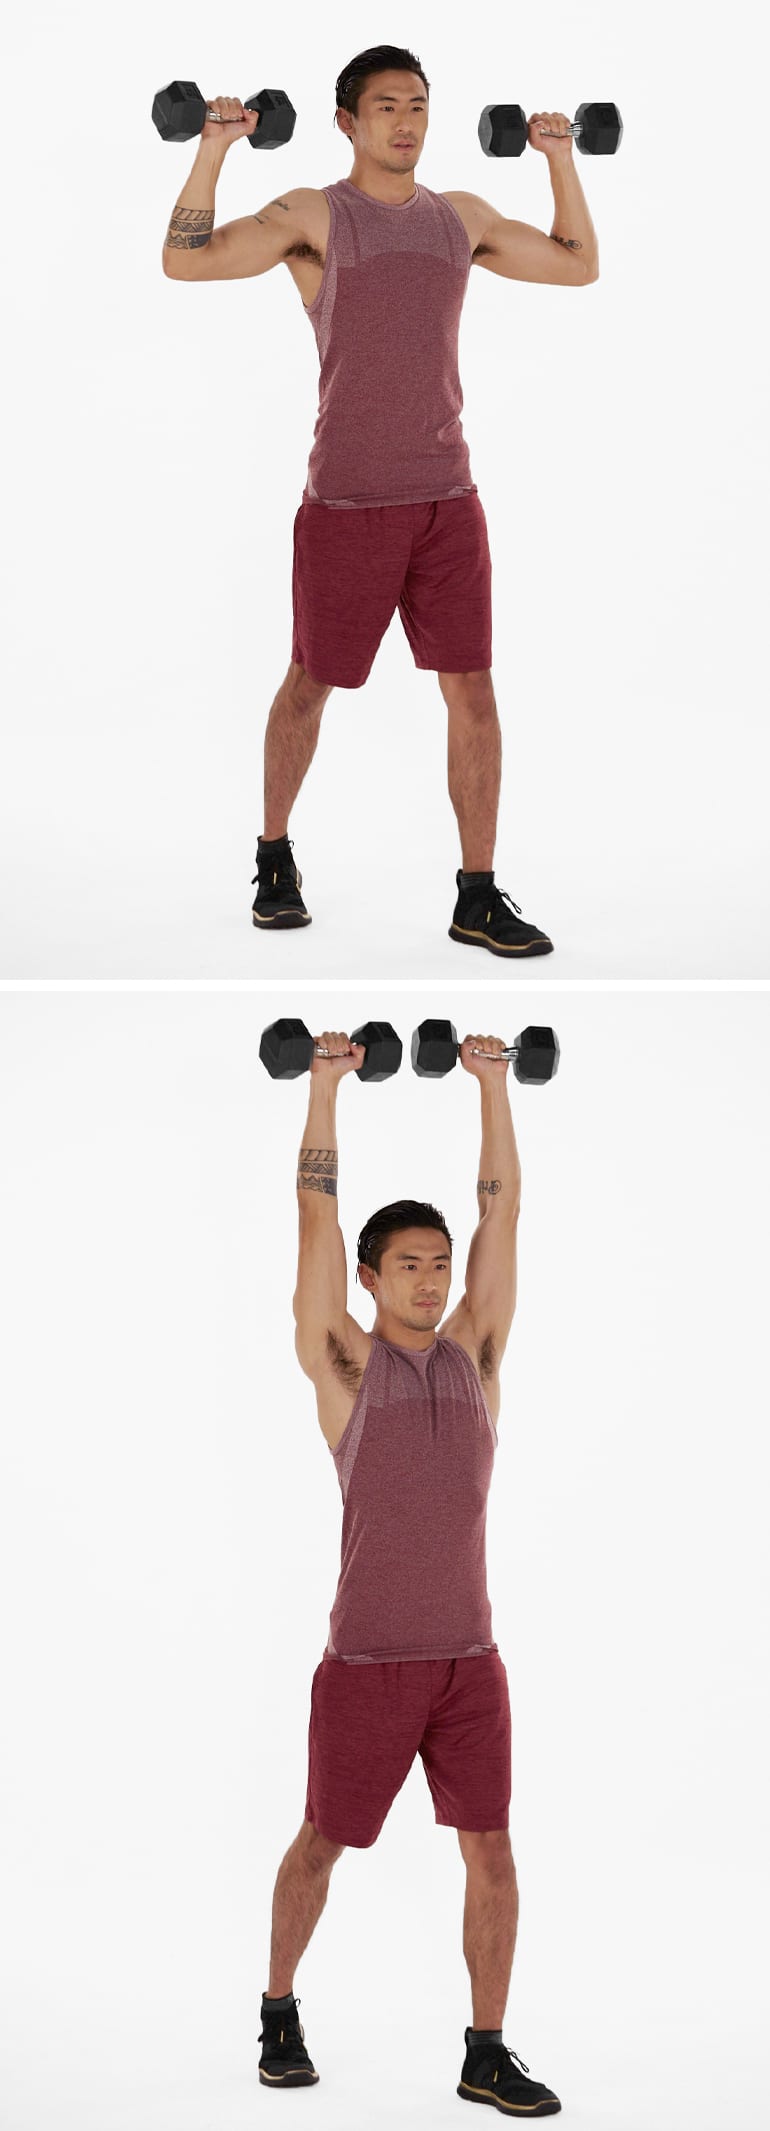 standing military press shoulder workouts